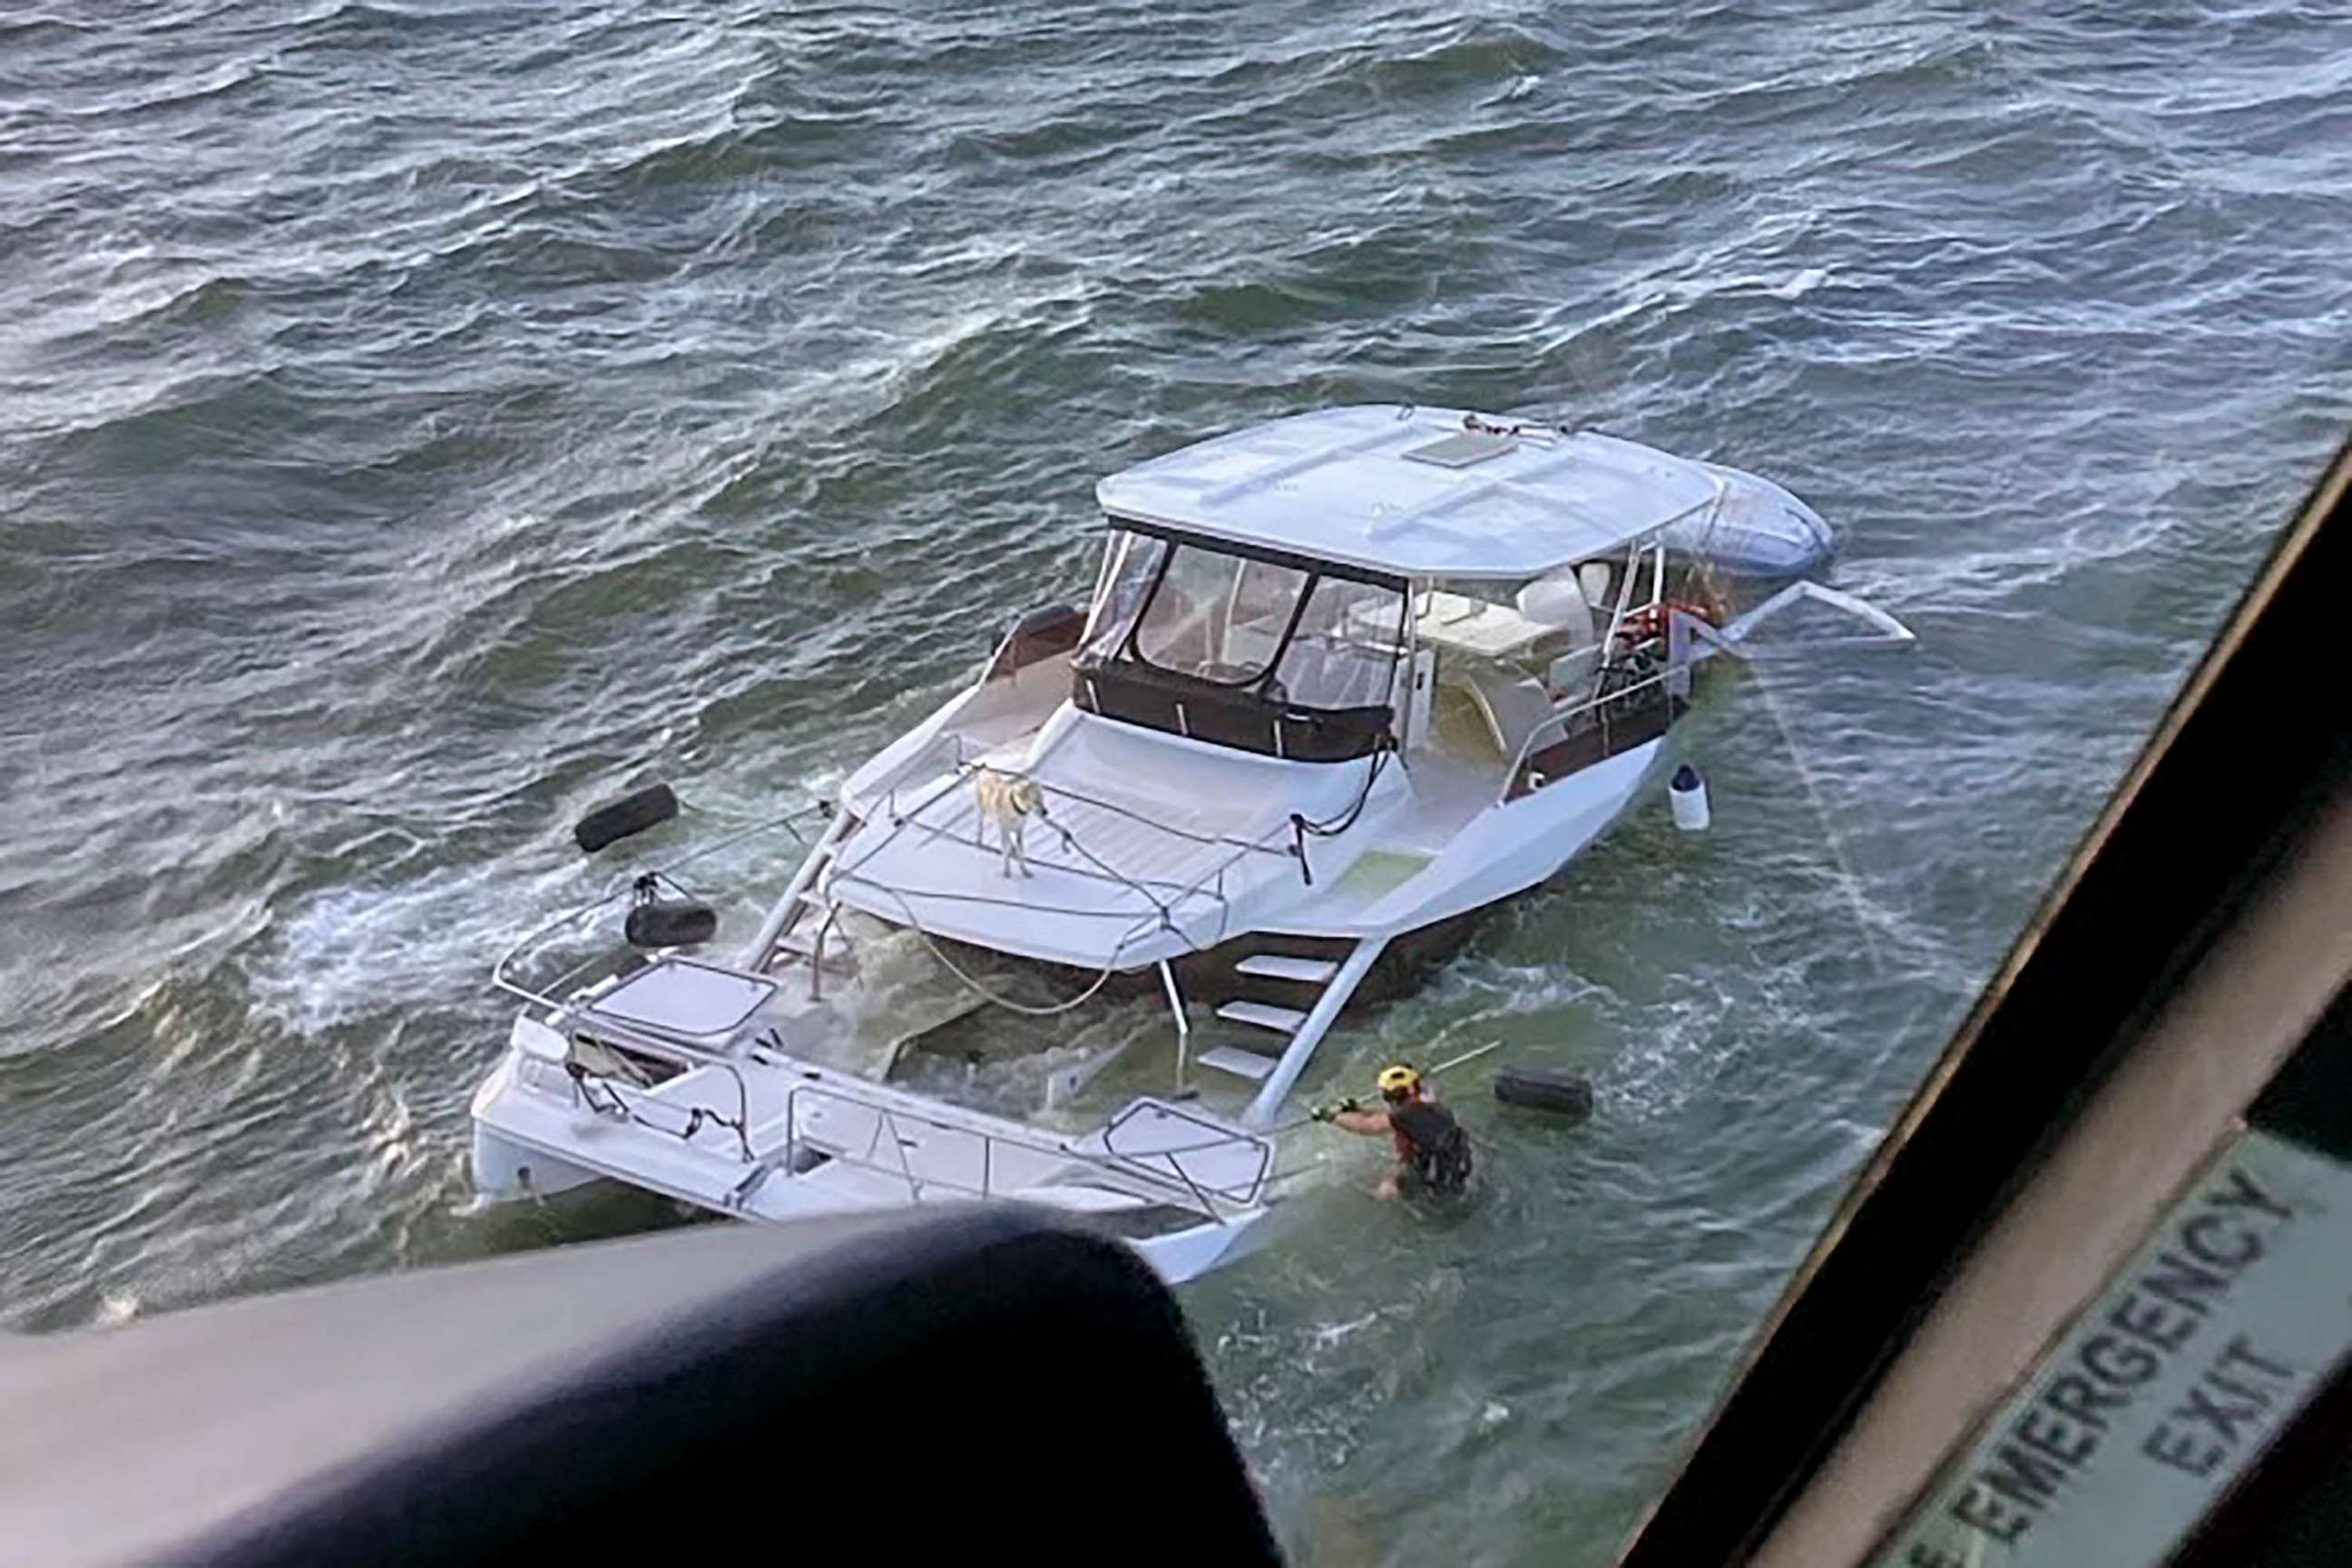 PHOTO: The U.S. Coast Guard rescued two people and a dog after their boat sank off the coast of Georgia on May 1, 2023.